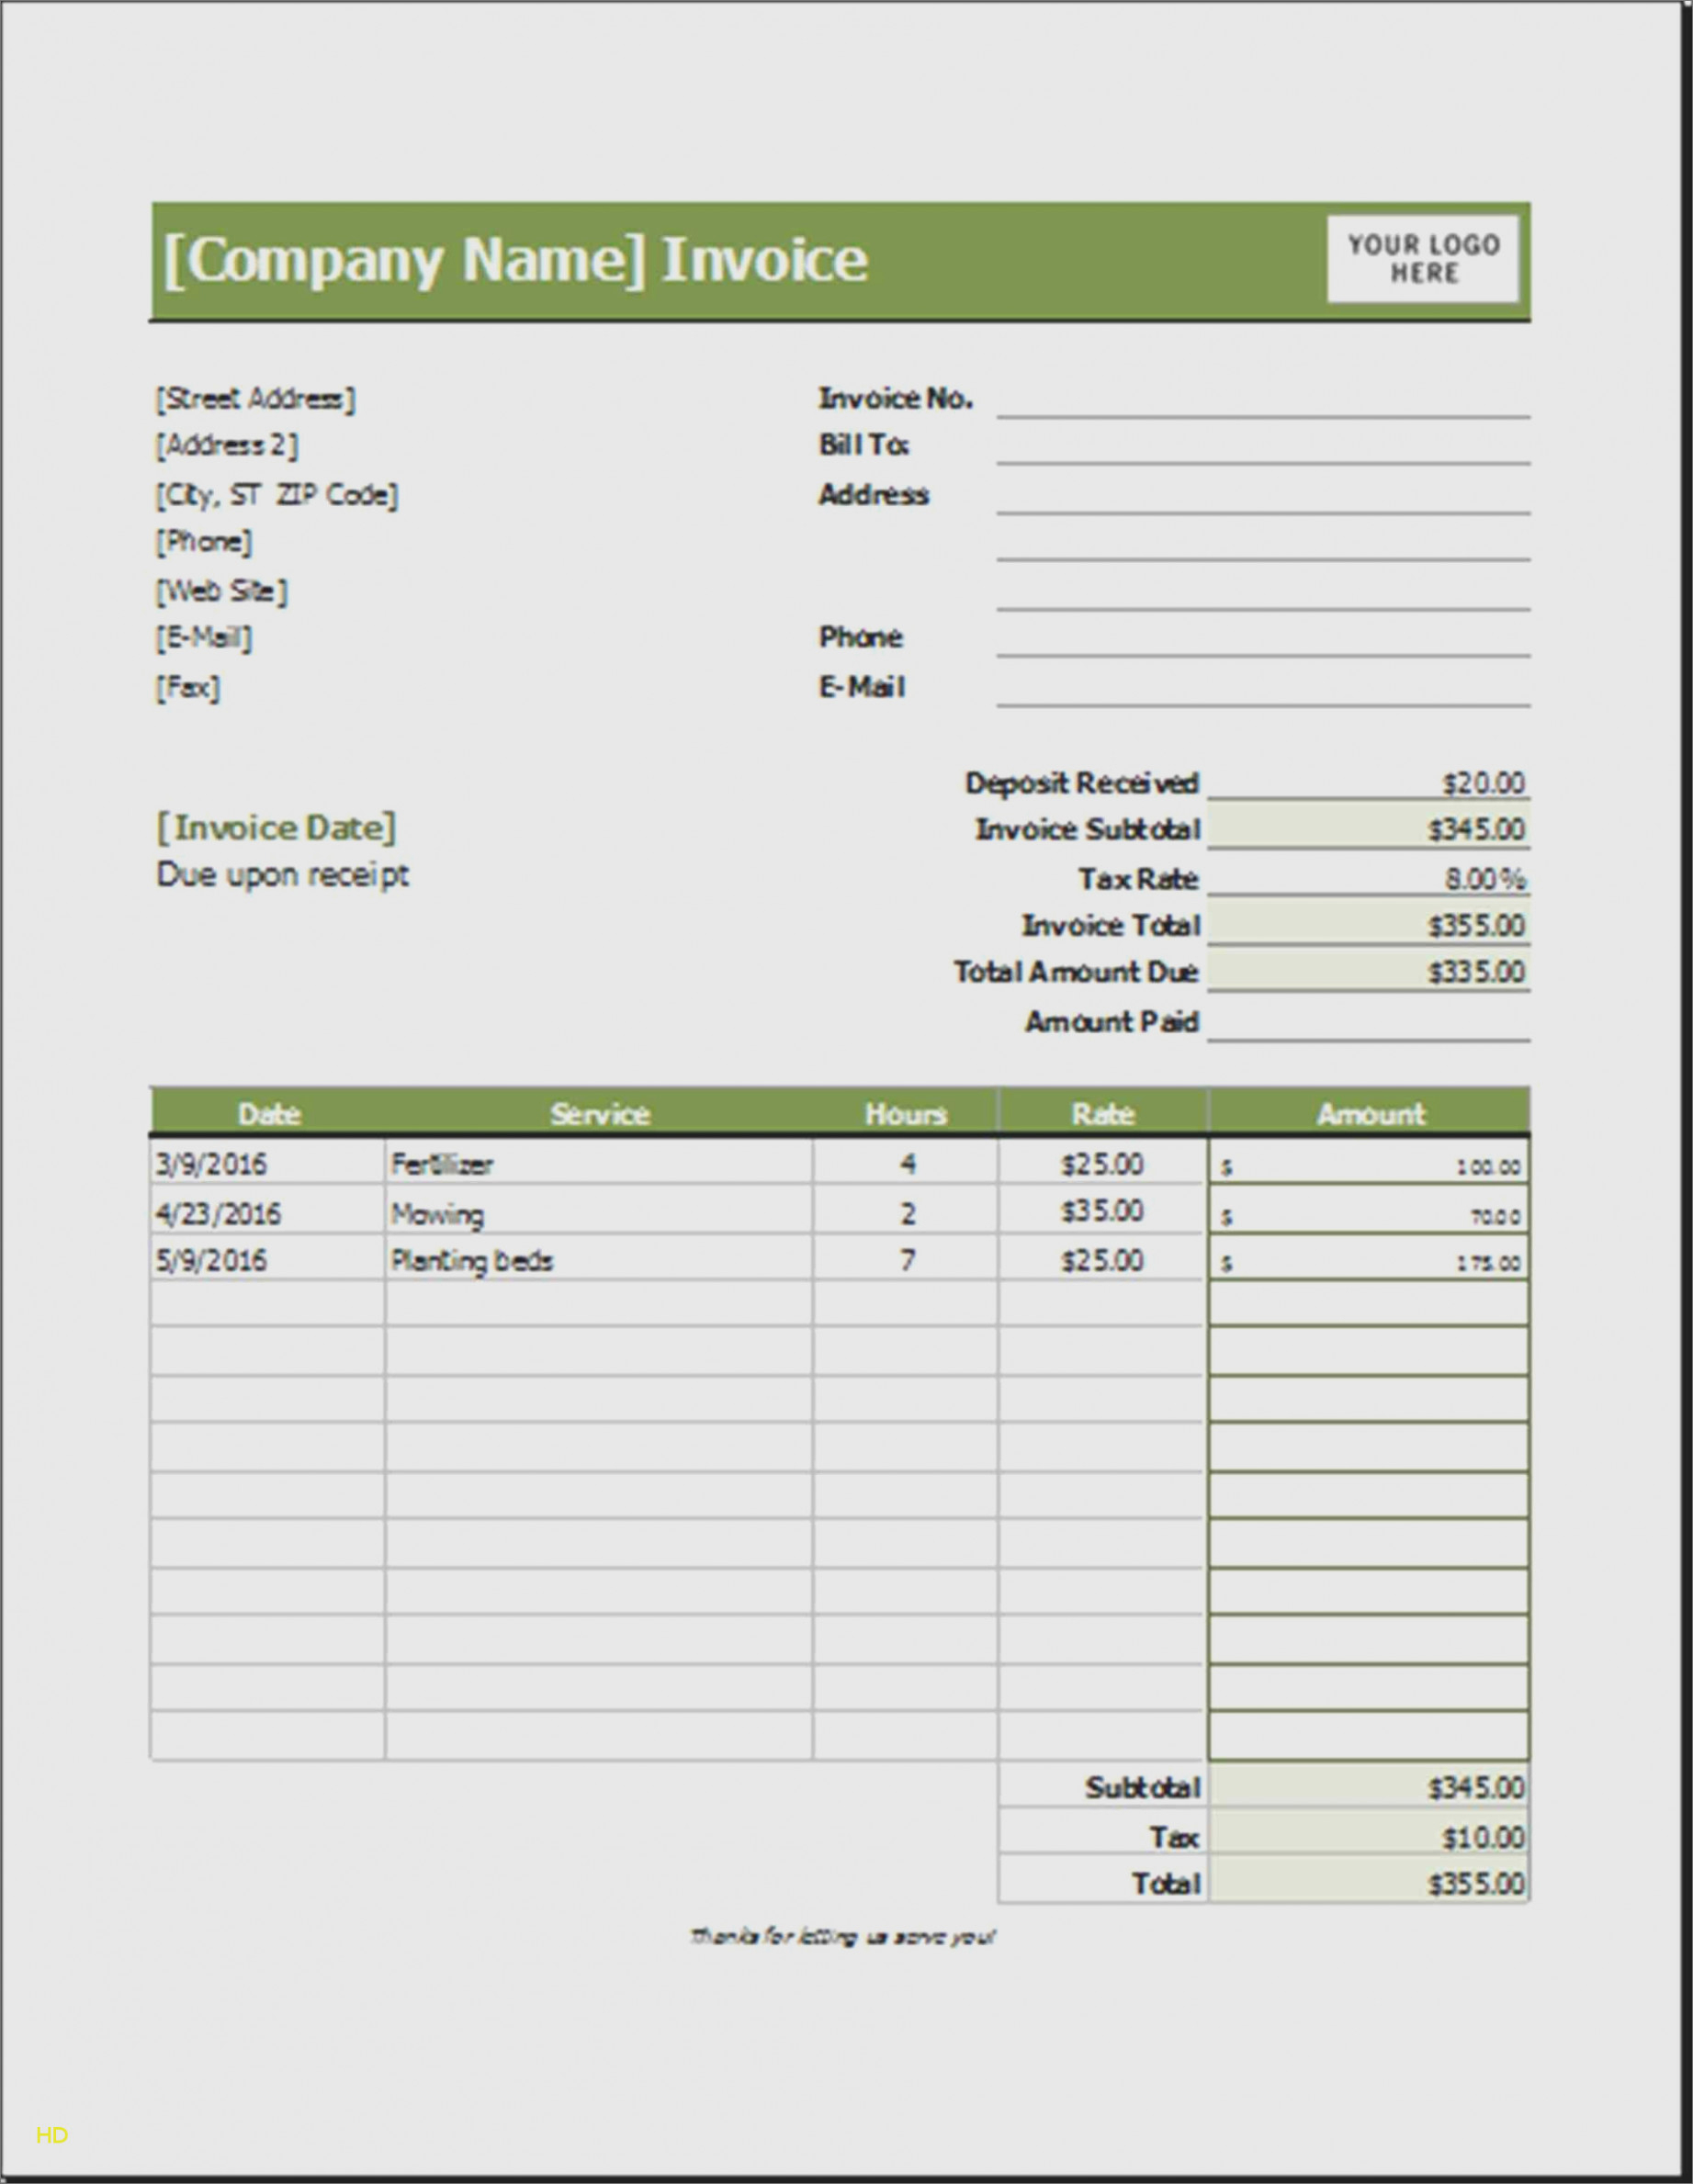 15-fresh-sample-lawn-care-invoice-free-invoice-template-throughout-landscaping-invoice